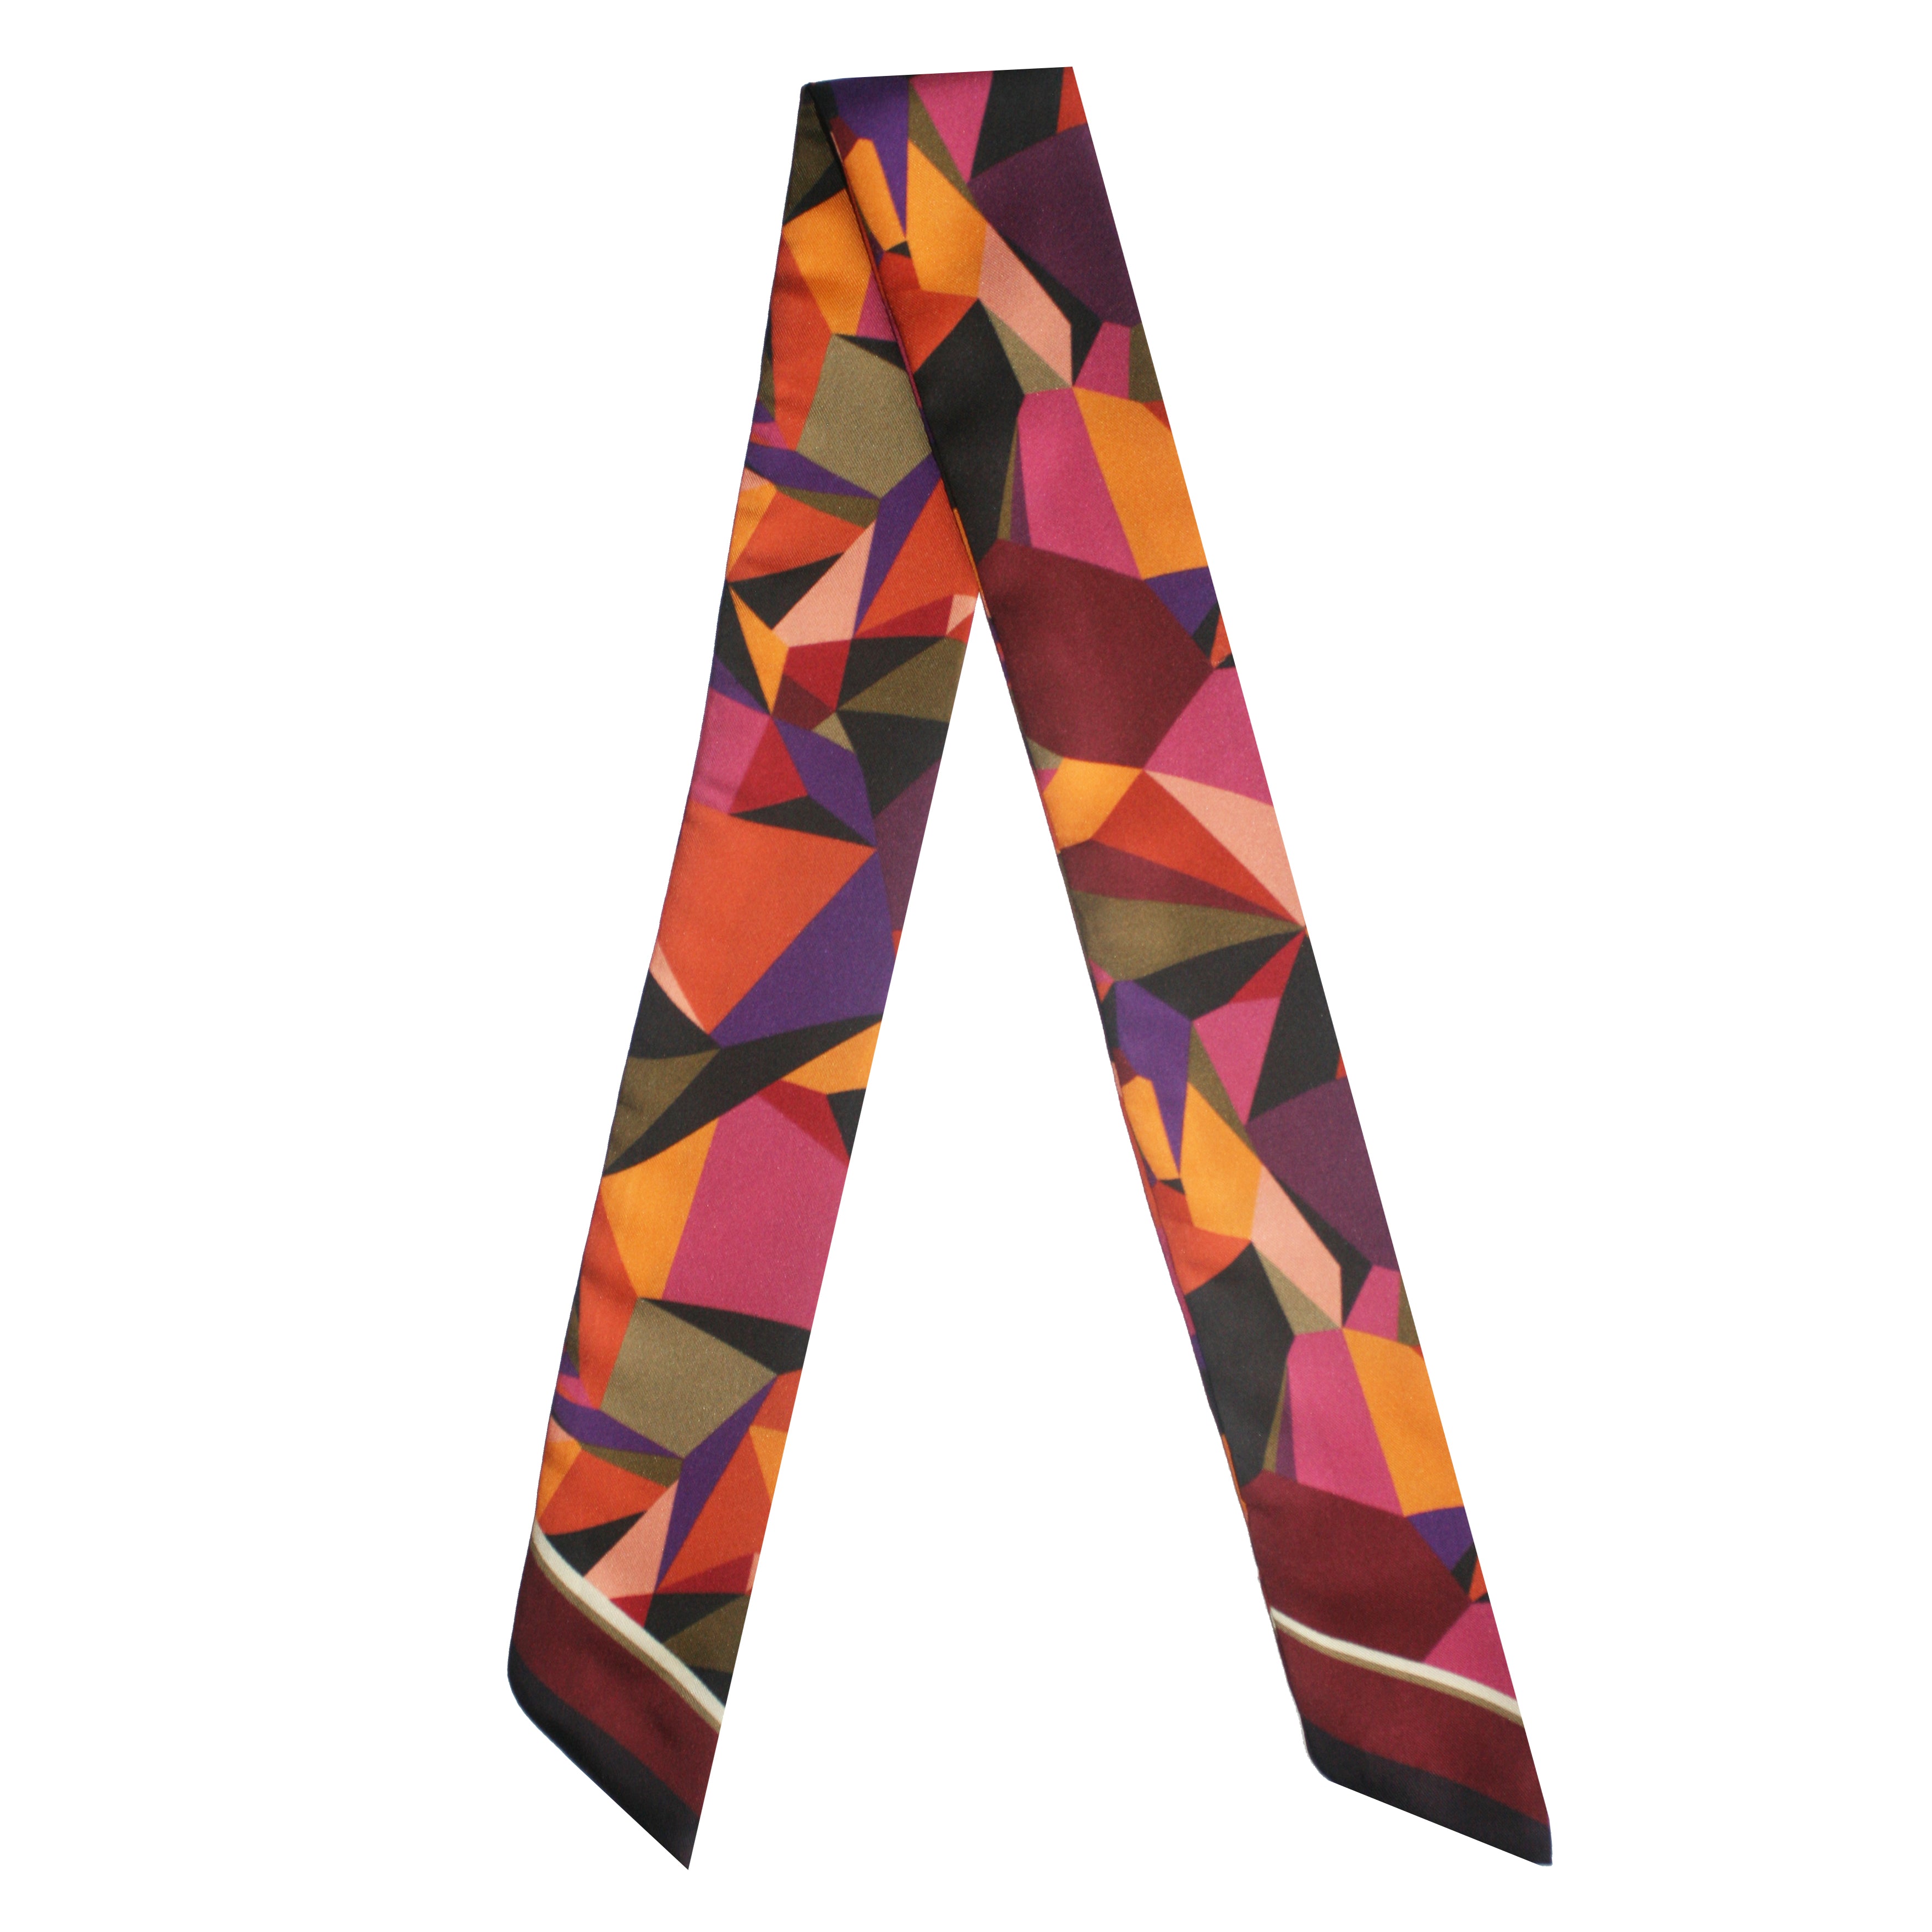 The Prism Twilly Scarf